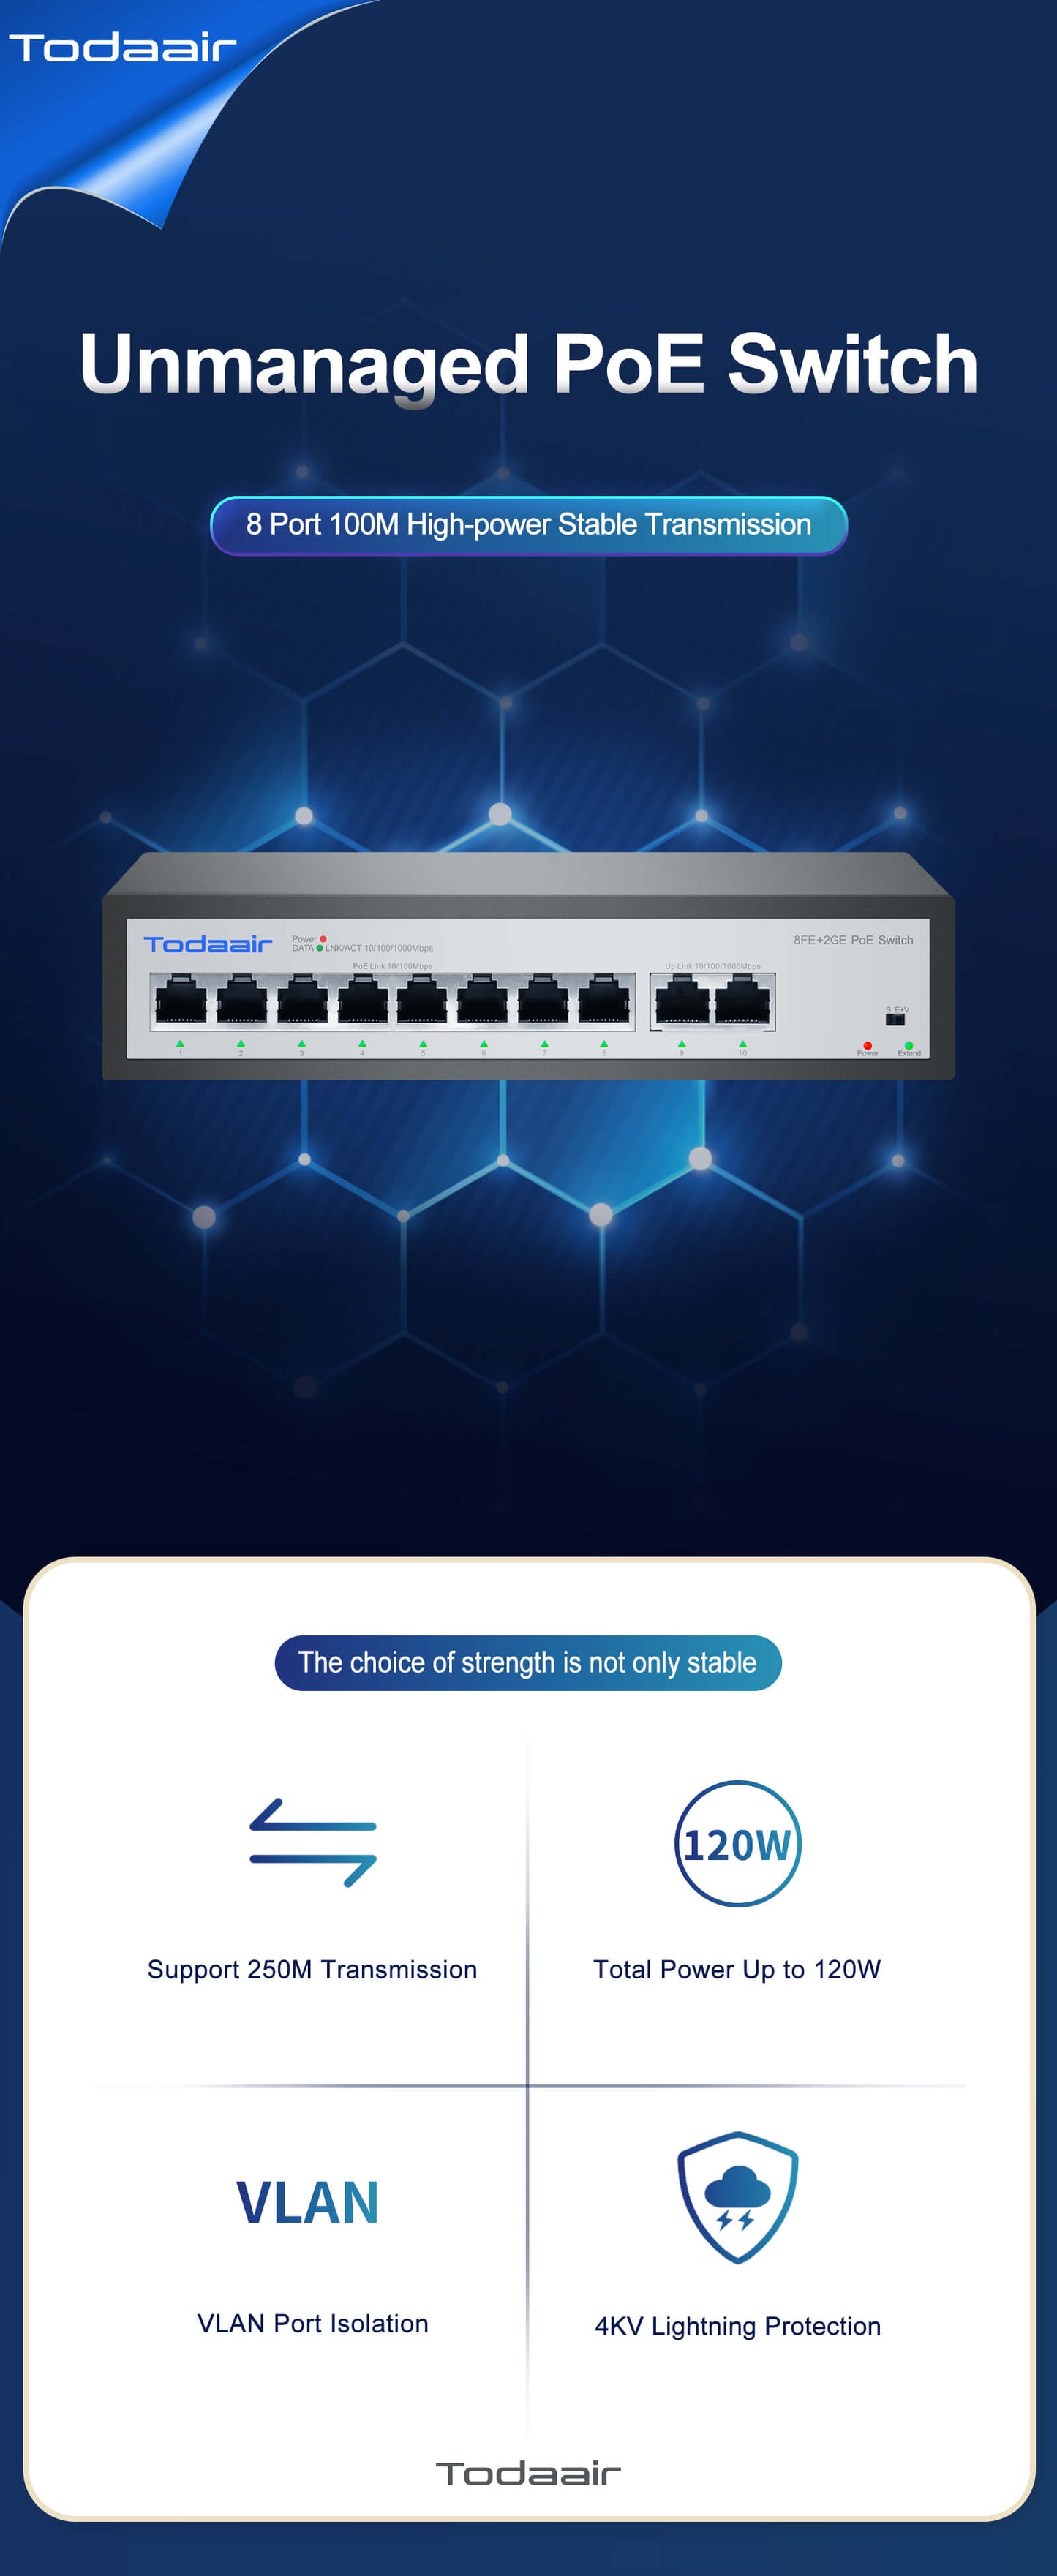 Todaair unmanned poe network Switch